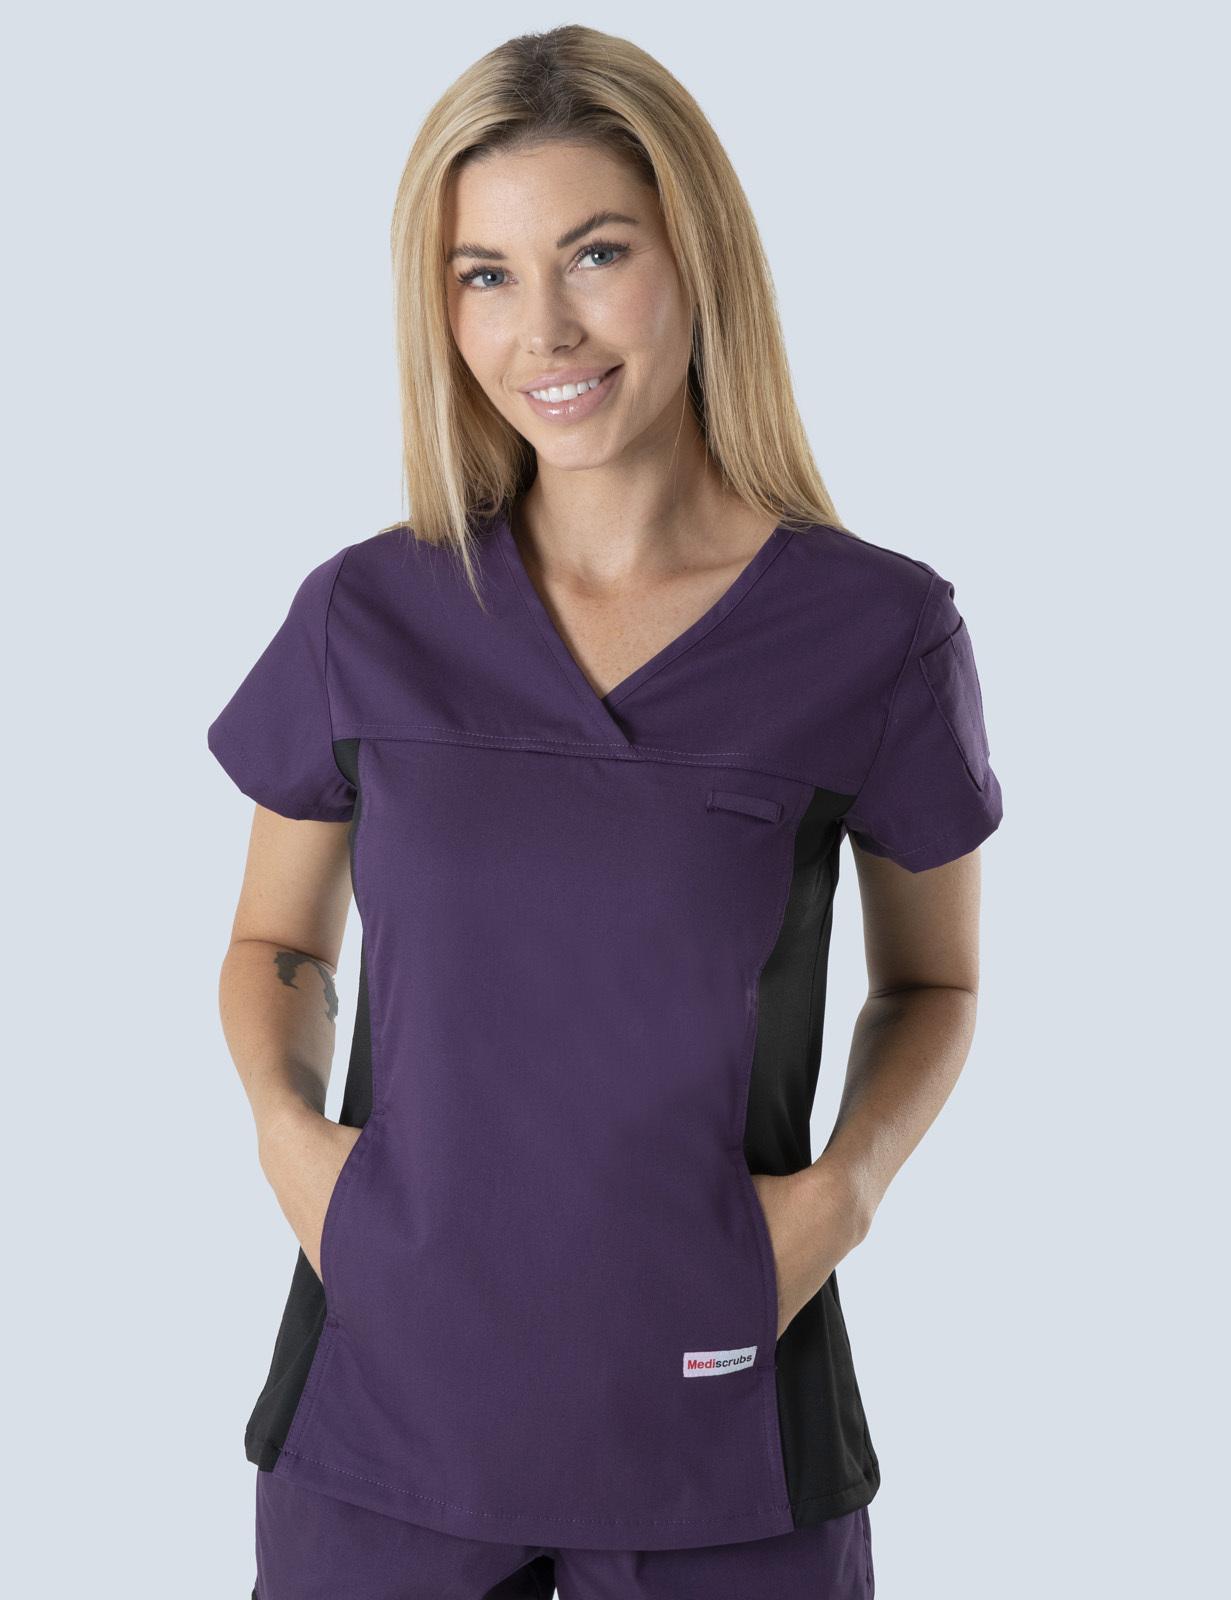 Tweed Hospital Pharmacy - PHARMACY TECHNICIAN - Aubergine Women's Fit Solid Scrub Top with Spandex Panel